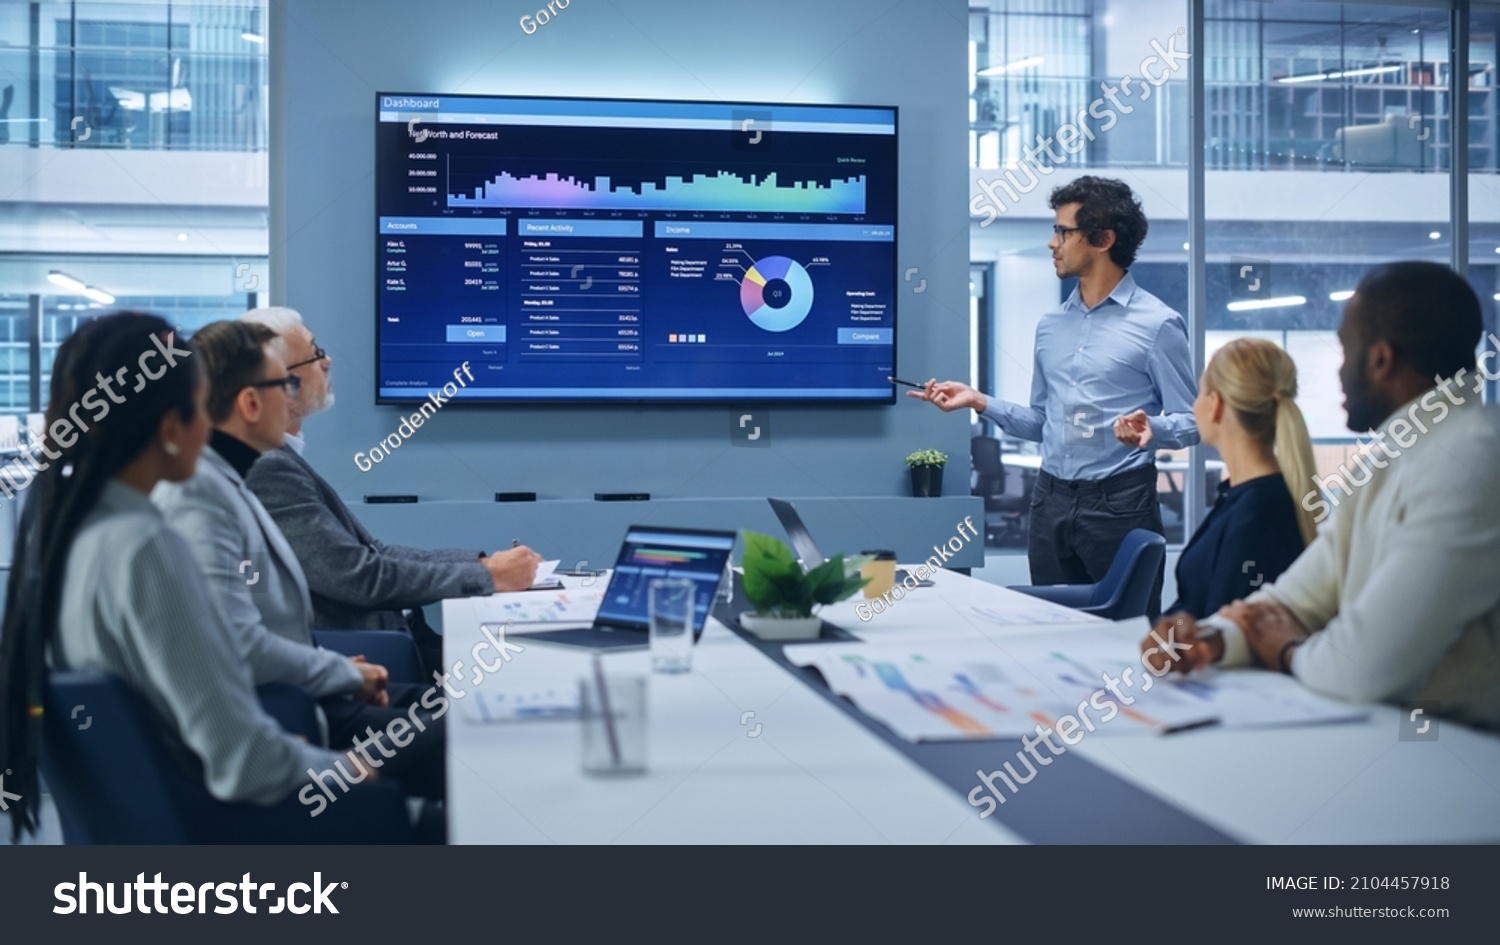 Office Conference Room Meeting Presentation: Latin Businessman Talks, Uses Wall TV to Show Company Growth with Big Data Analysis, Graphs, Charts, Infographics. Multi-Ethnic e-Commerce Startup Workers #2104457918